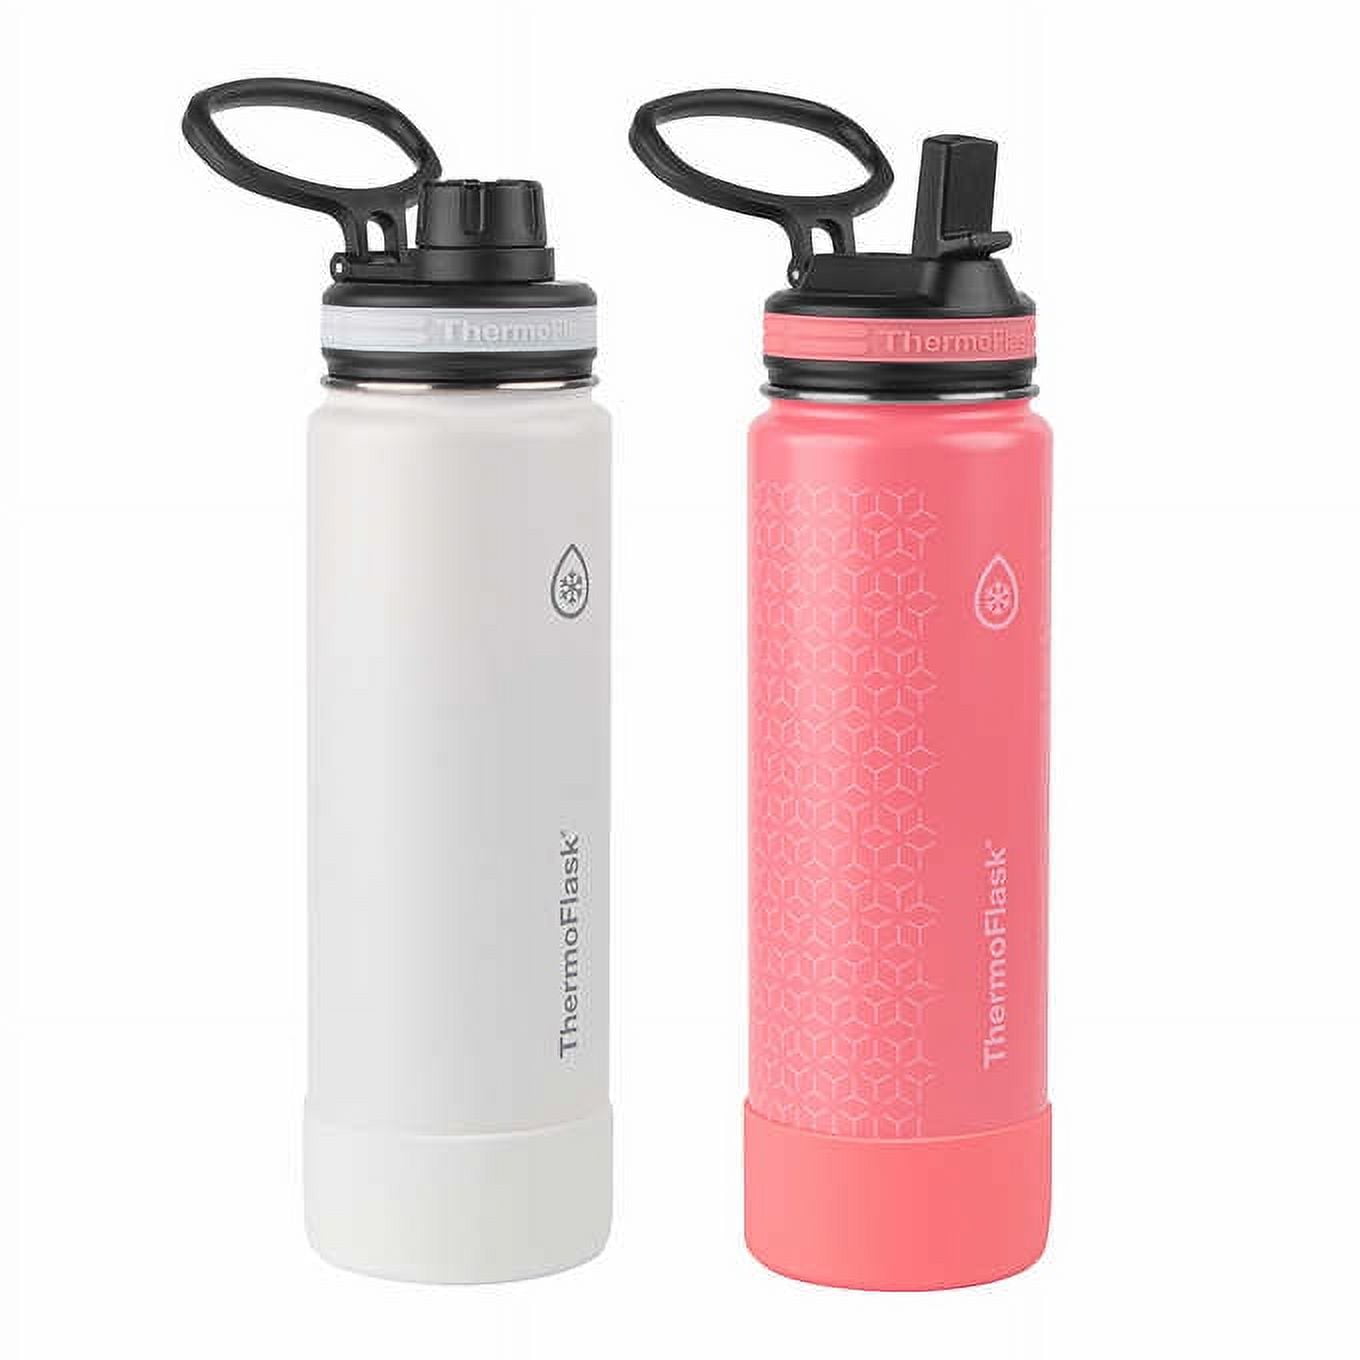 Insulated bottle 50cl / 17oz pink - Thermocafé - Thermos